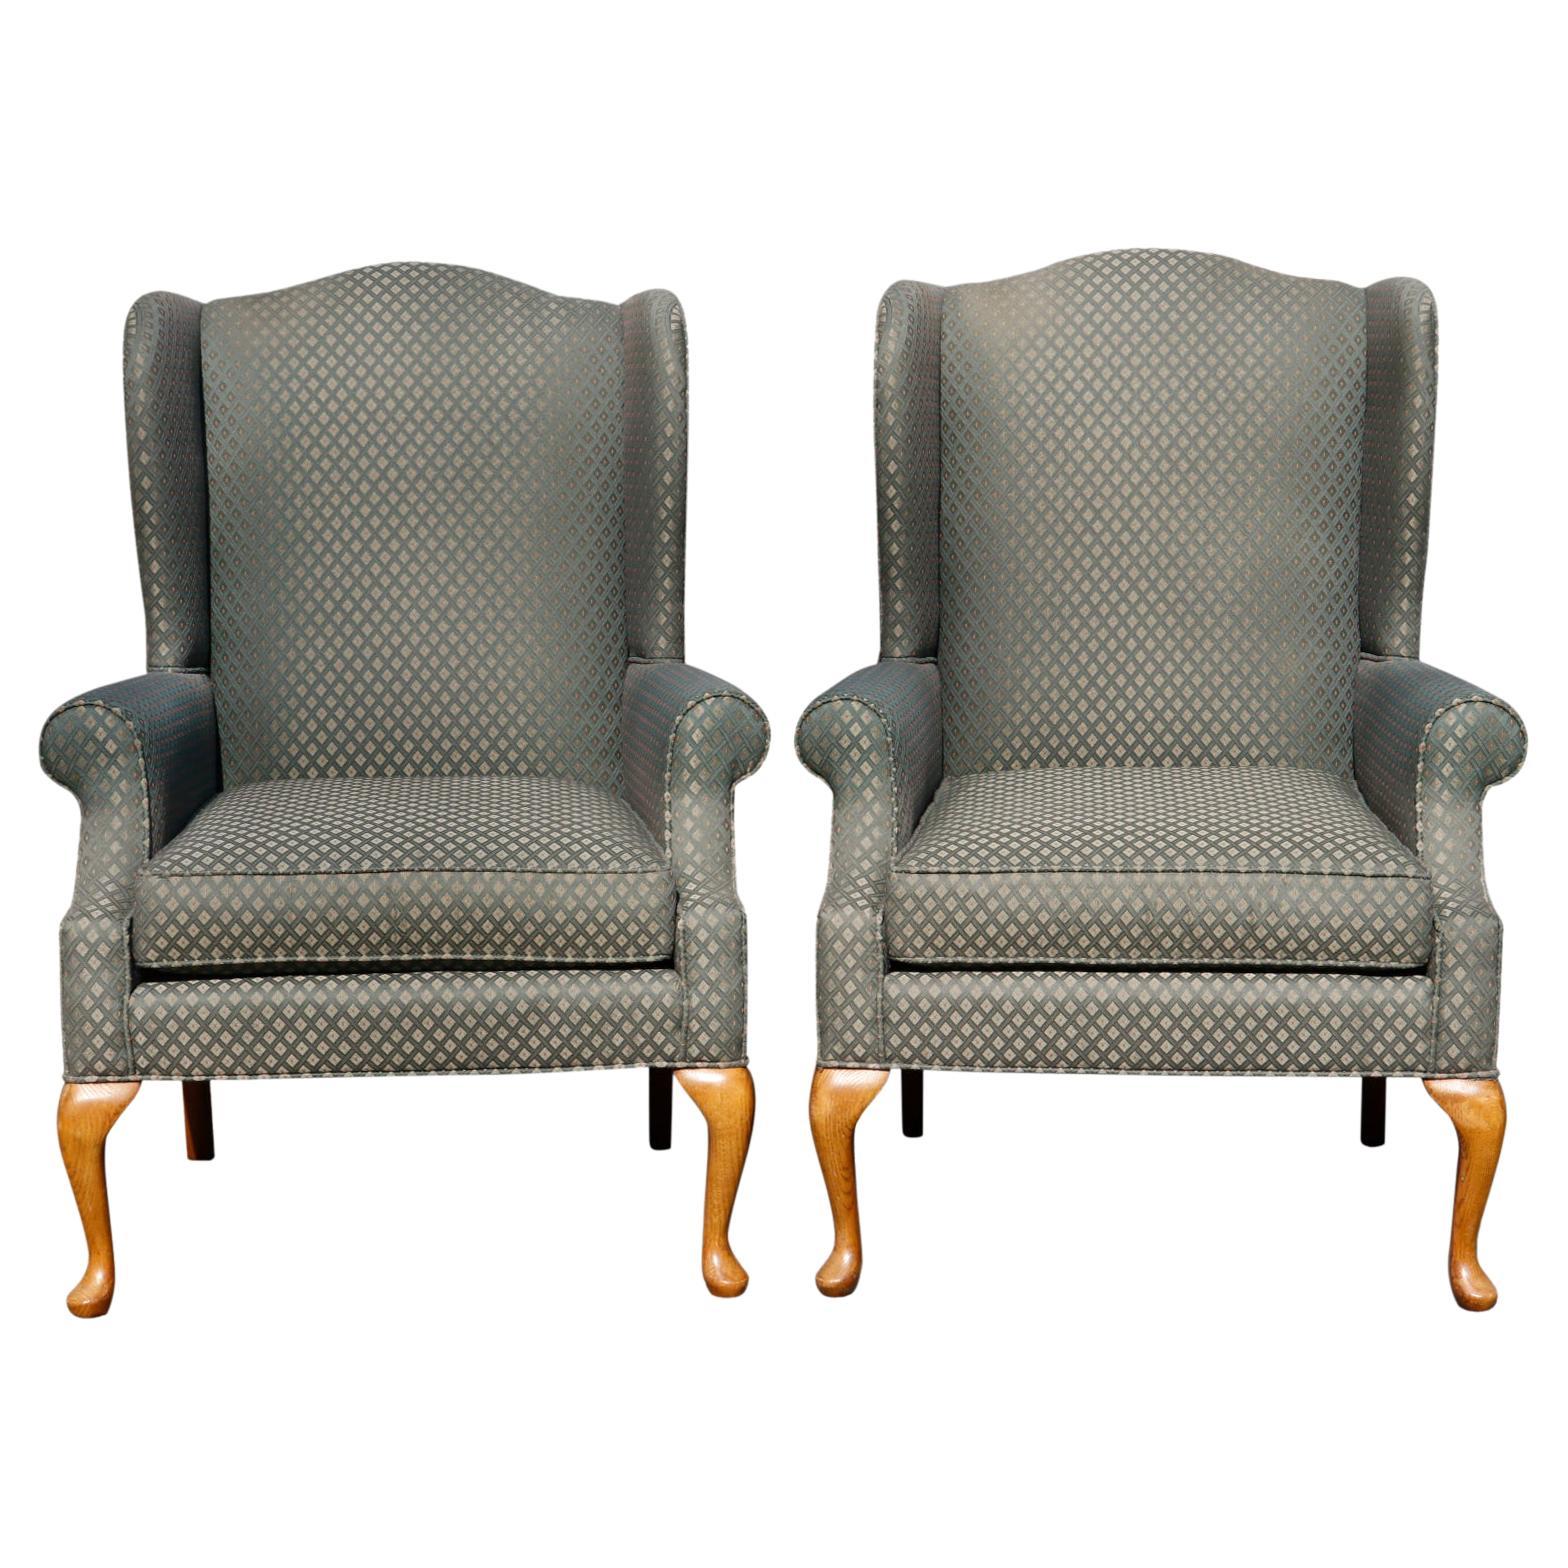 C R Laine Wingback Chairs, a Pair